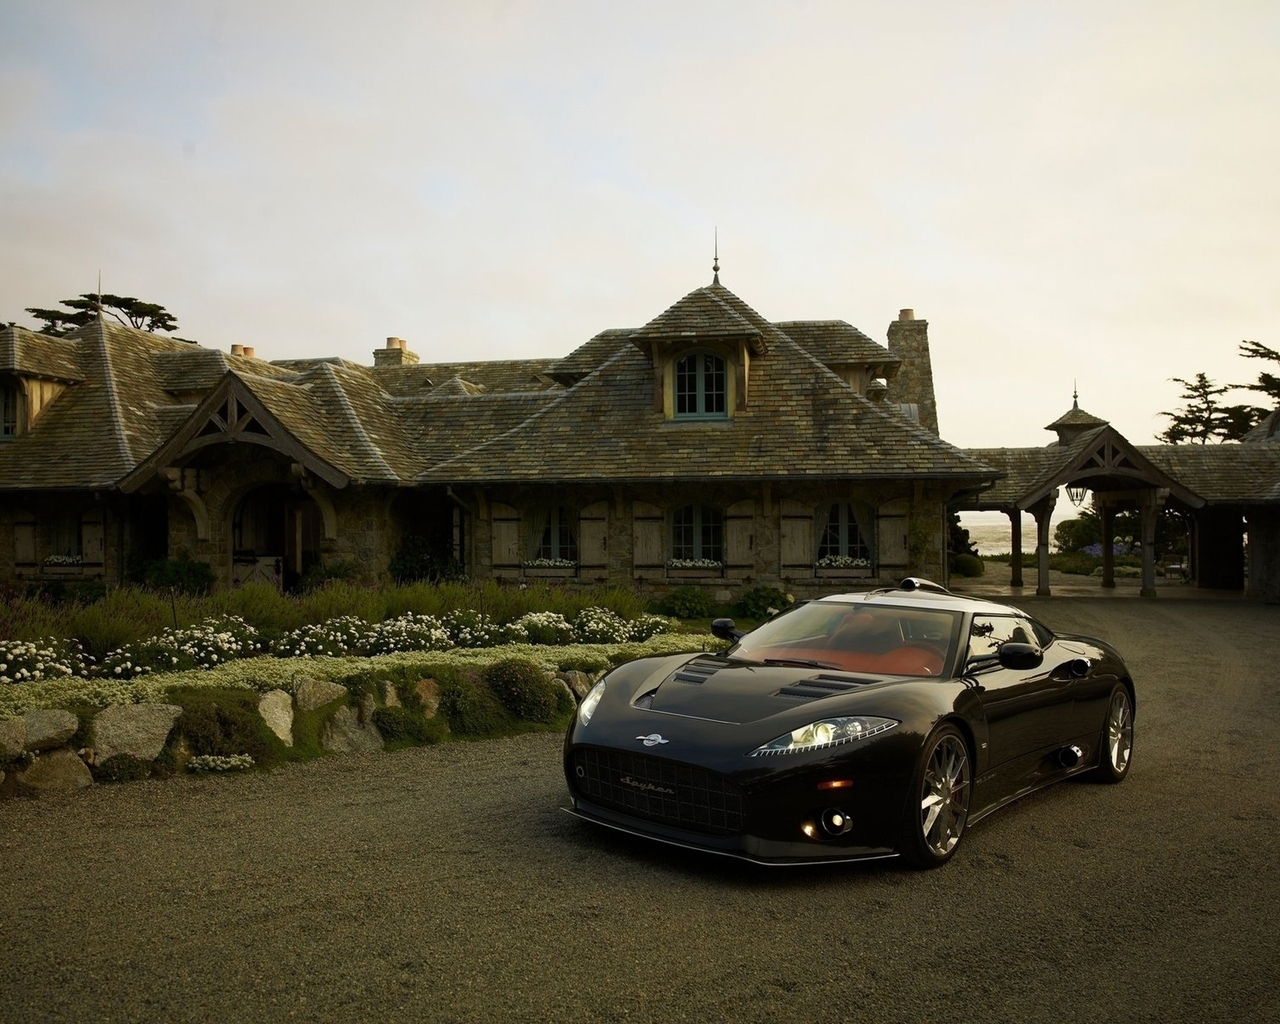 Image: The Spyker C8, Spyker, supercar, black, sports car, road, house